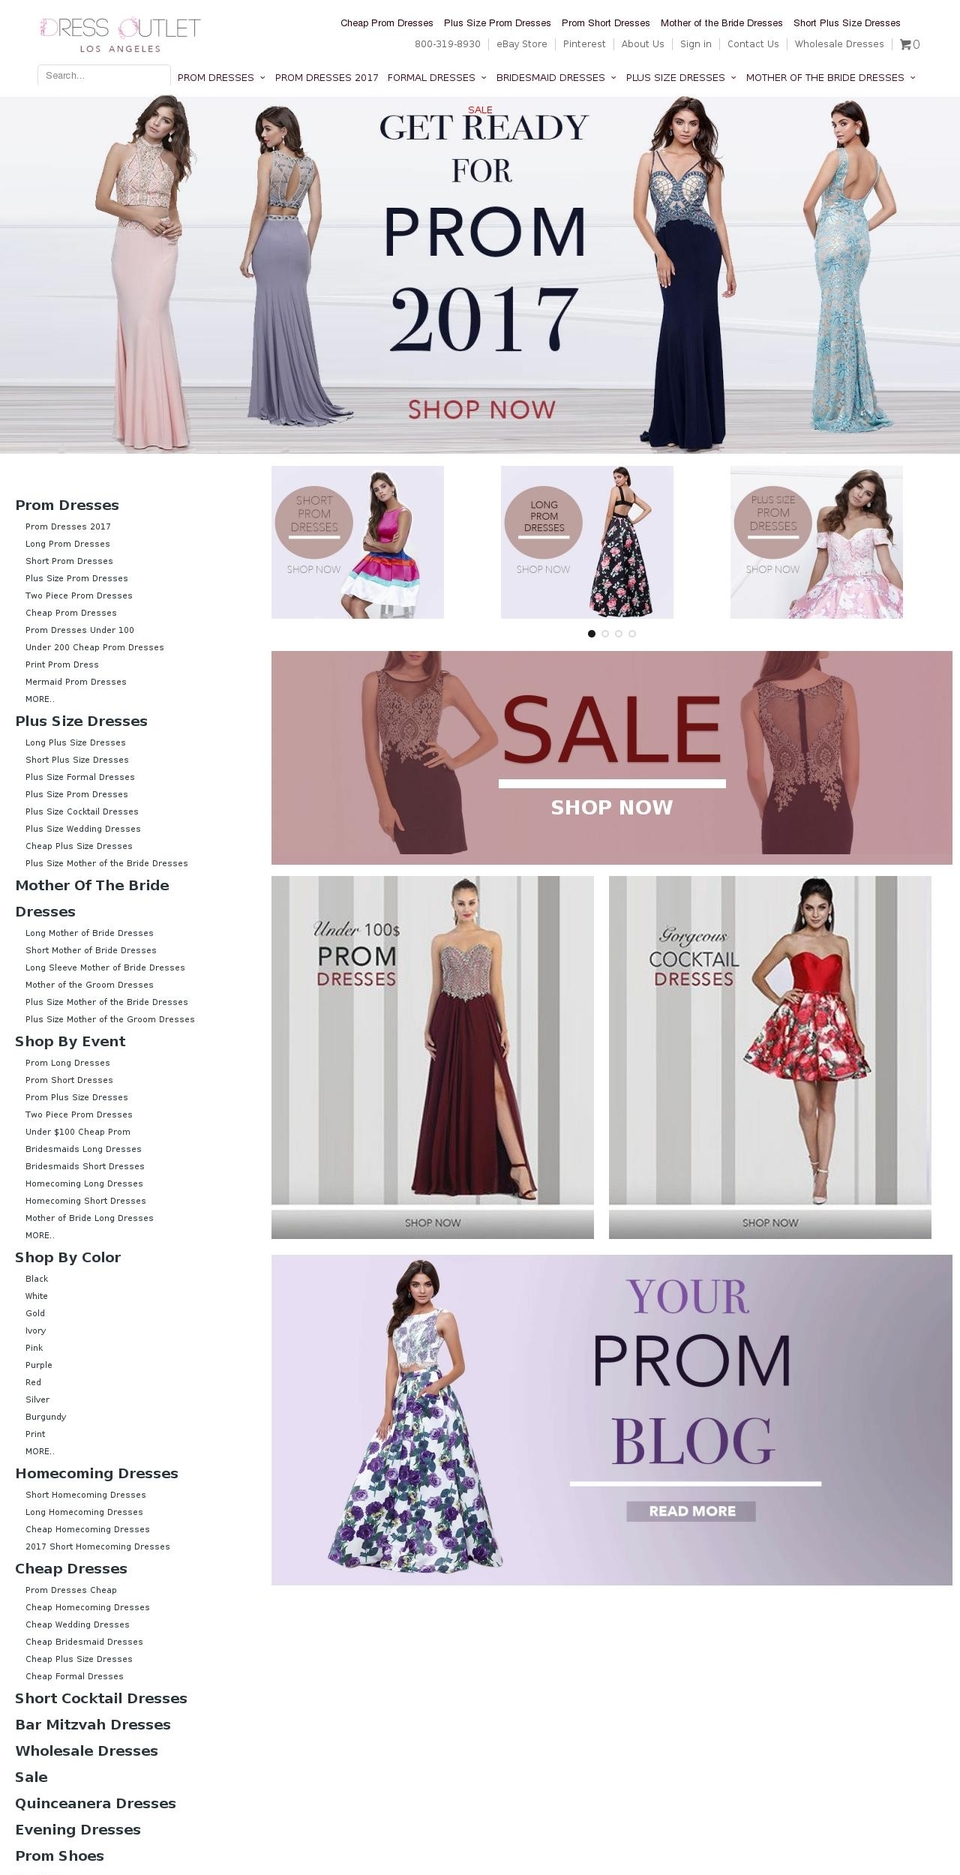 Dawn Shopify theme site example thedressoutlet.com